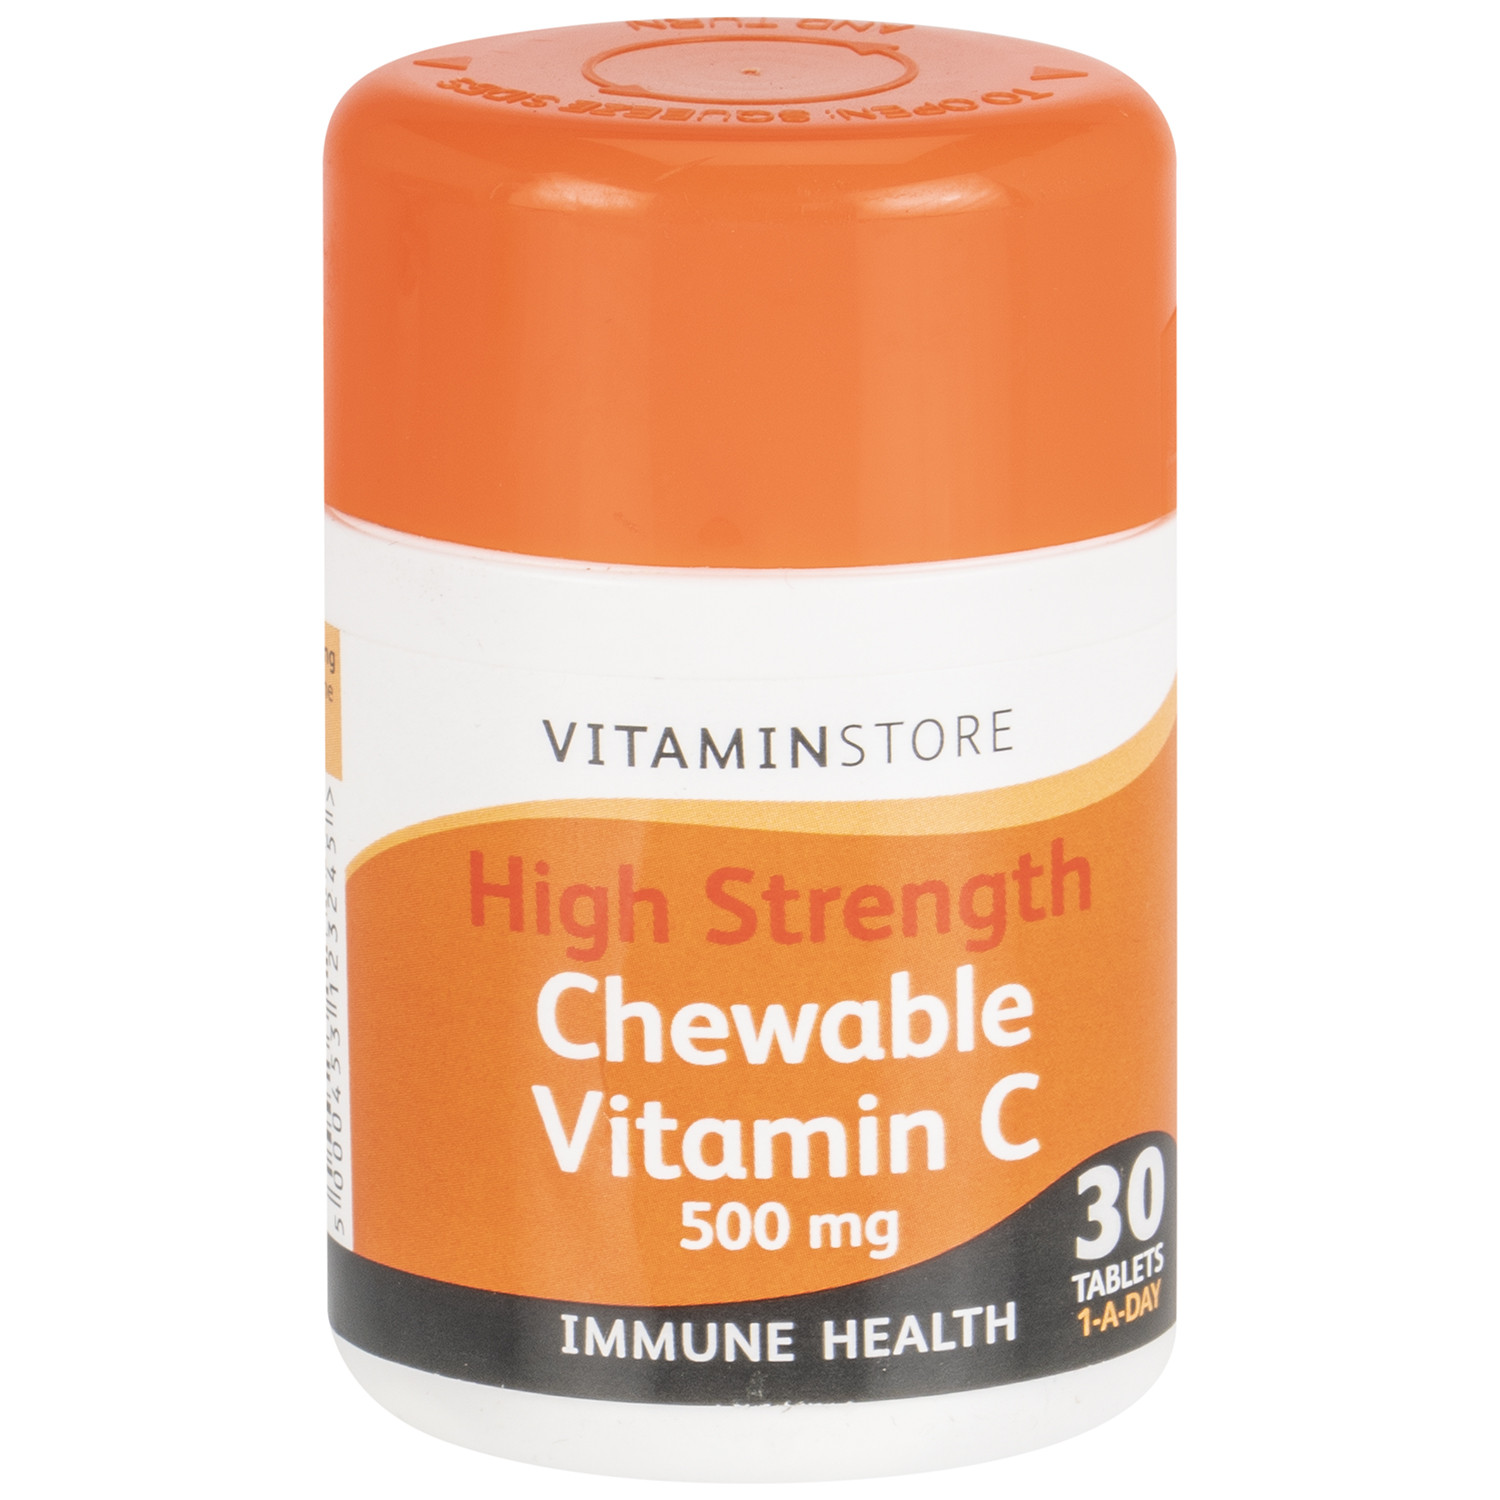 Chewable Vitamin C Tablets Image